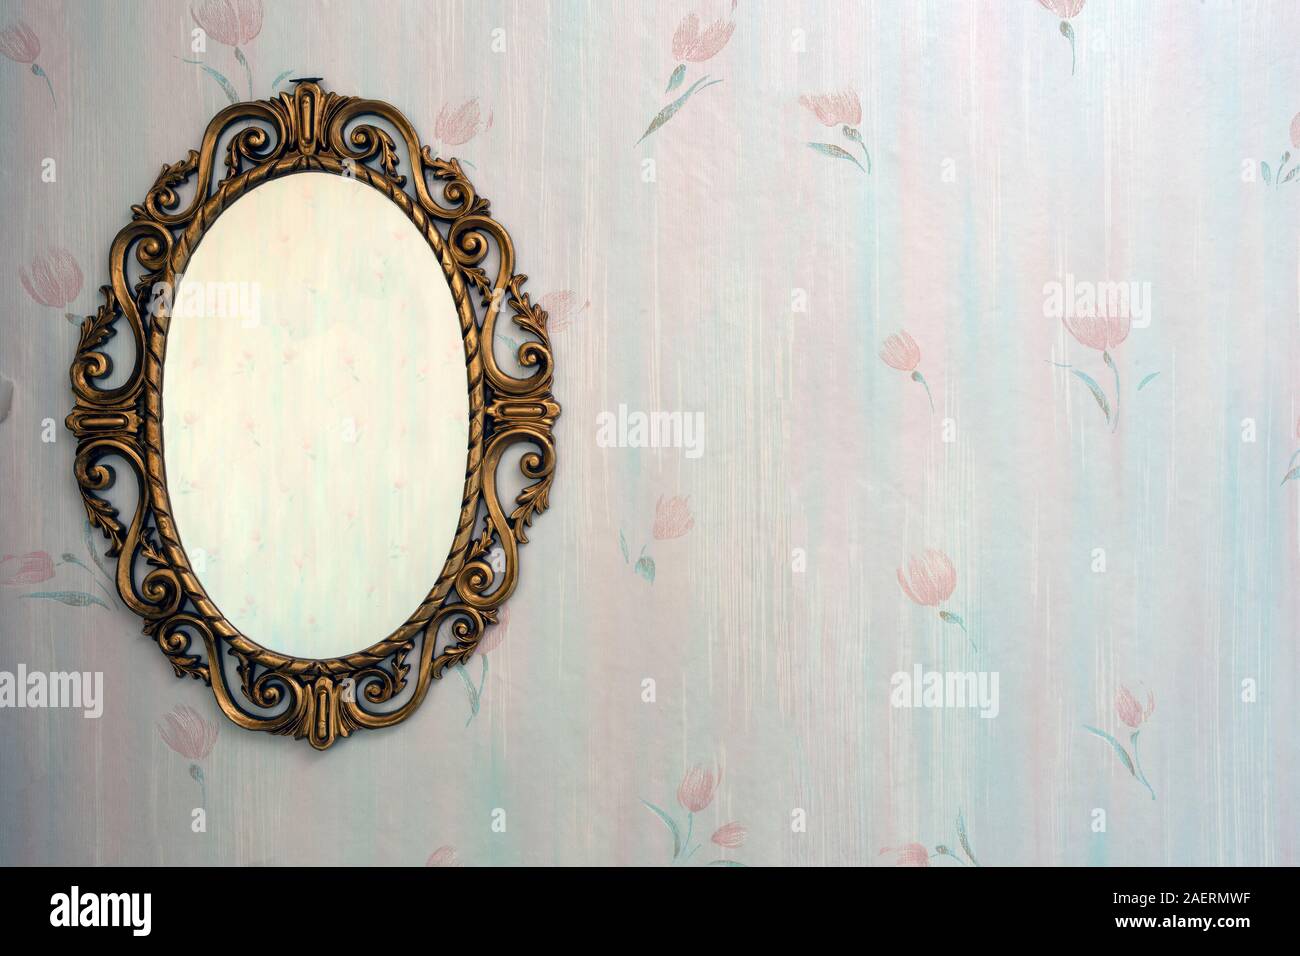 Old antique gold mirror hanging in a vintage room with old pattern wallpaper Stock Photo